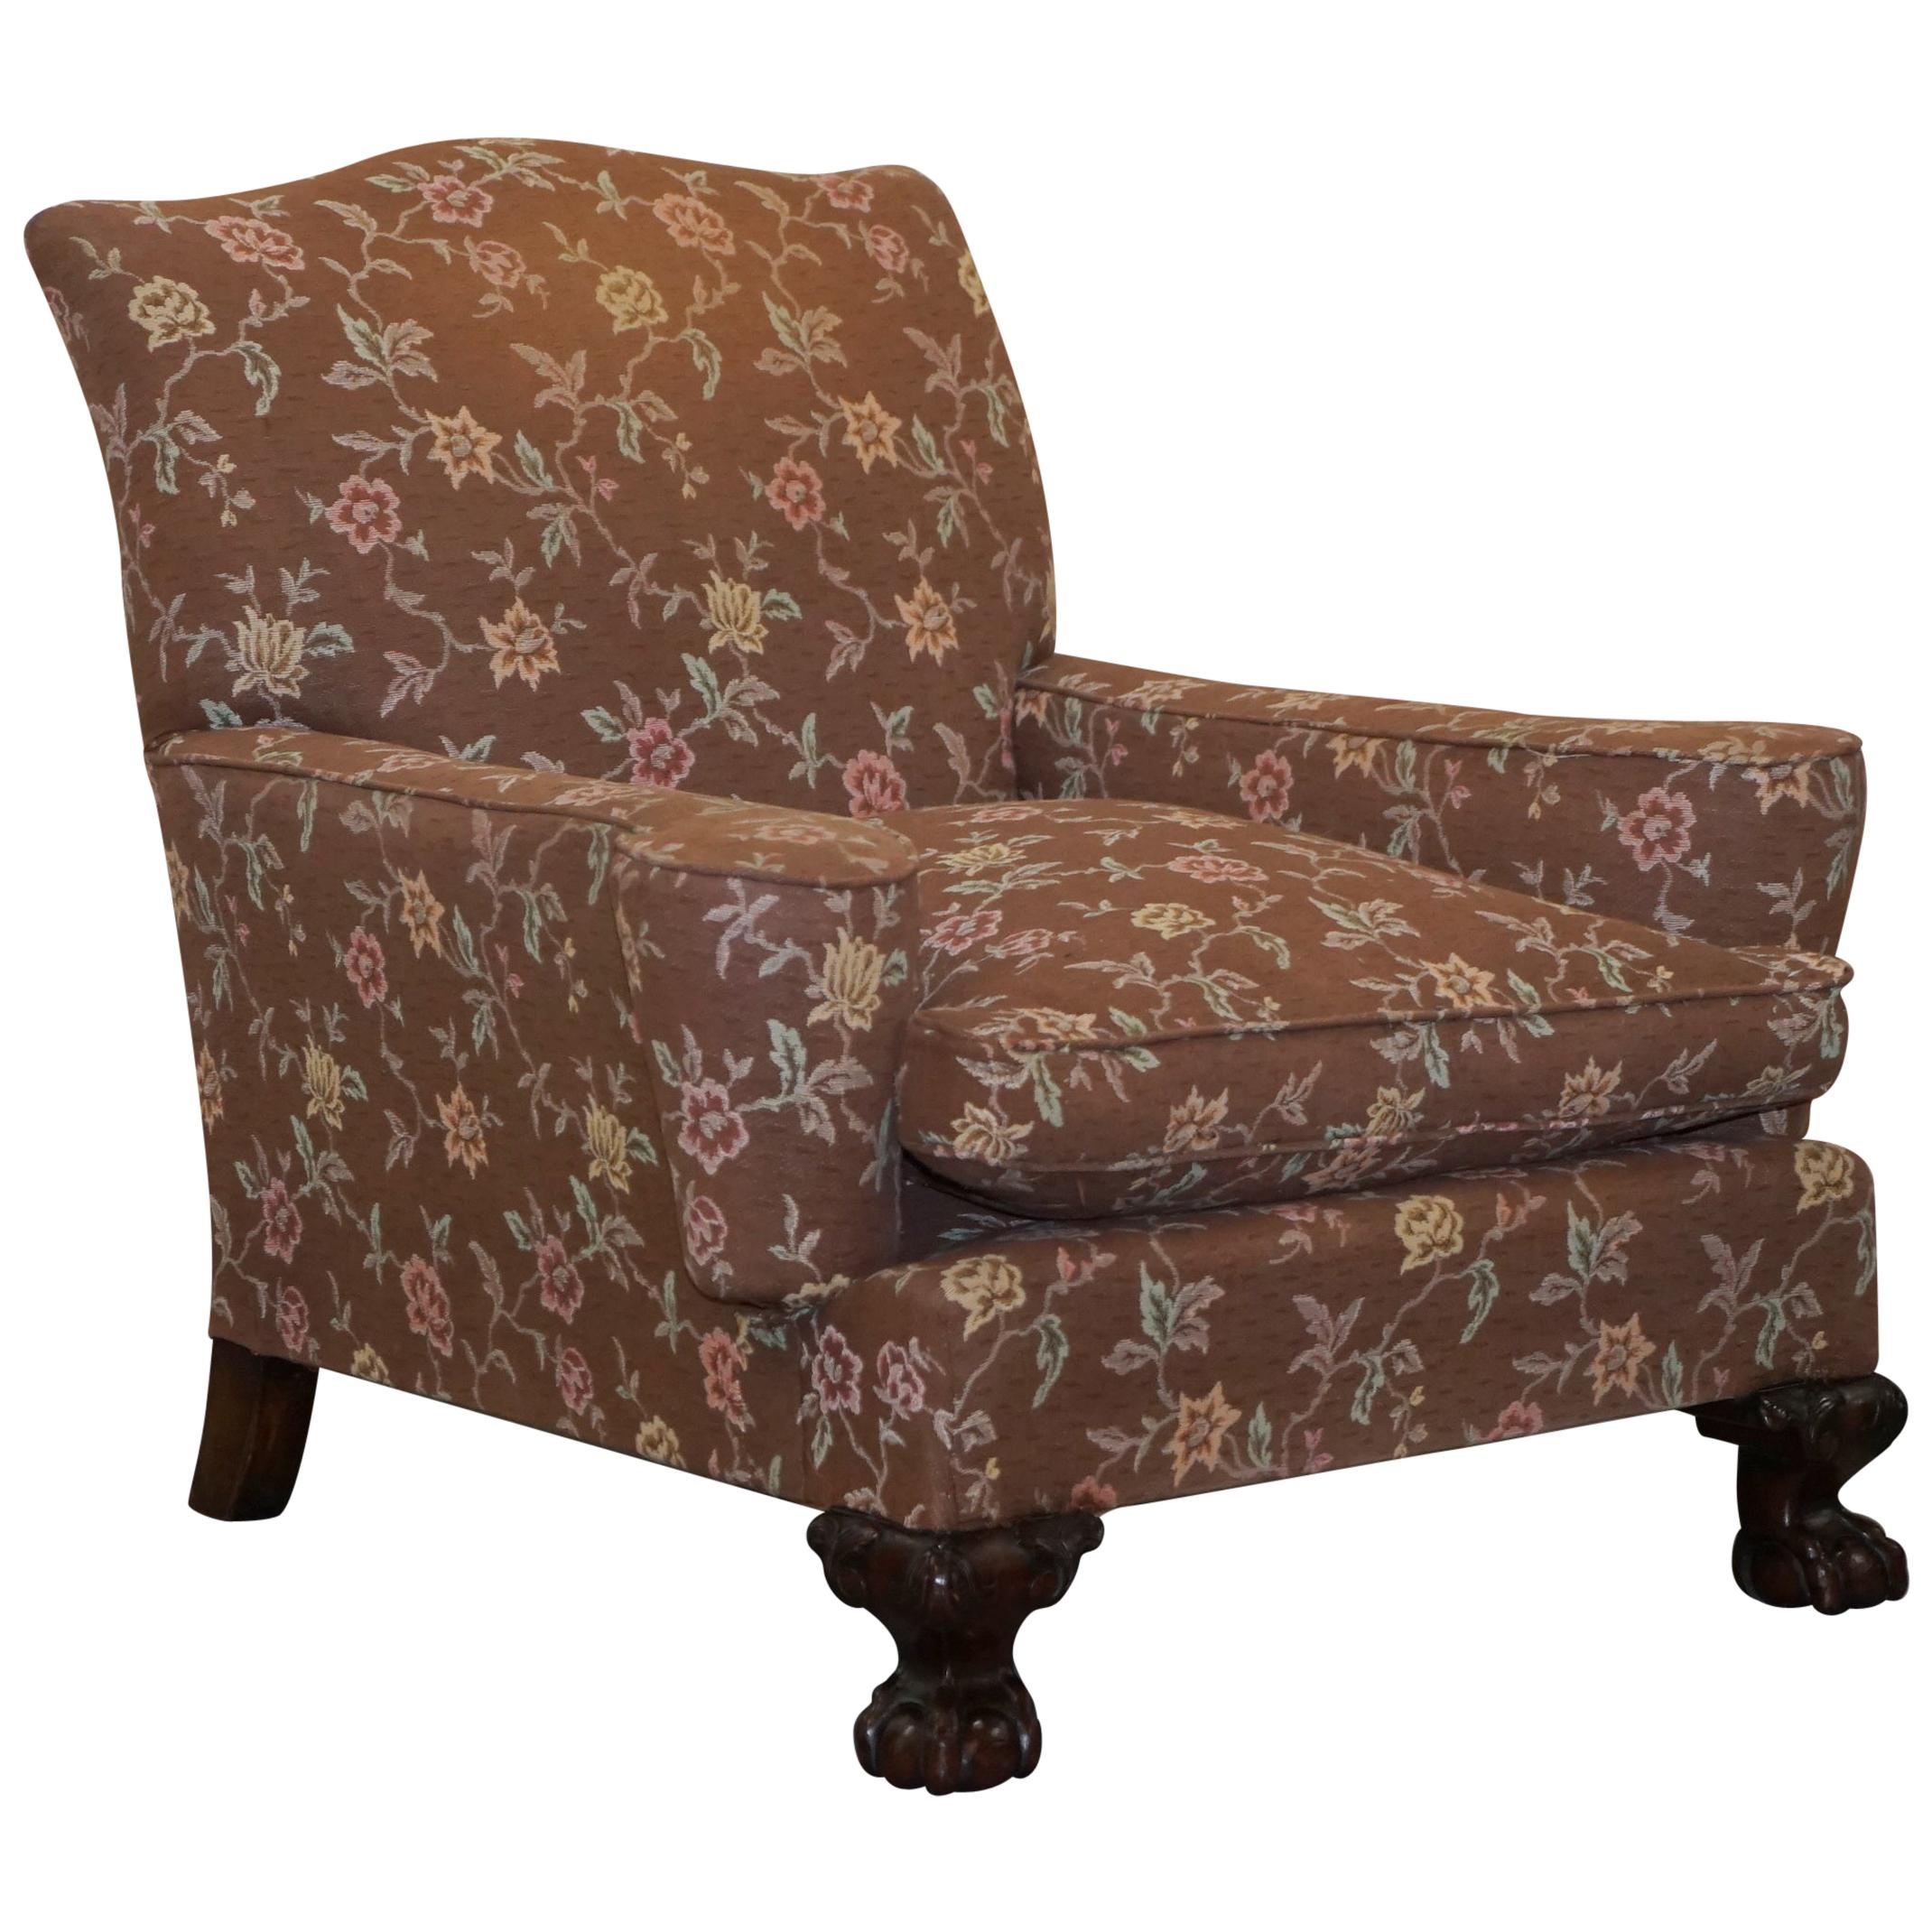 Victorian Mahogany Frame Claw & Ball Feet Library Club Armchair Floral Upholster